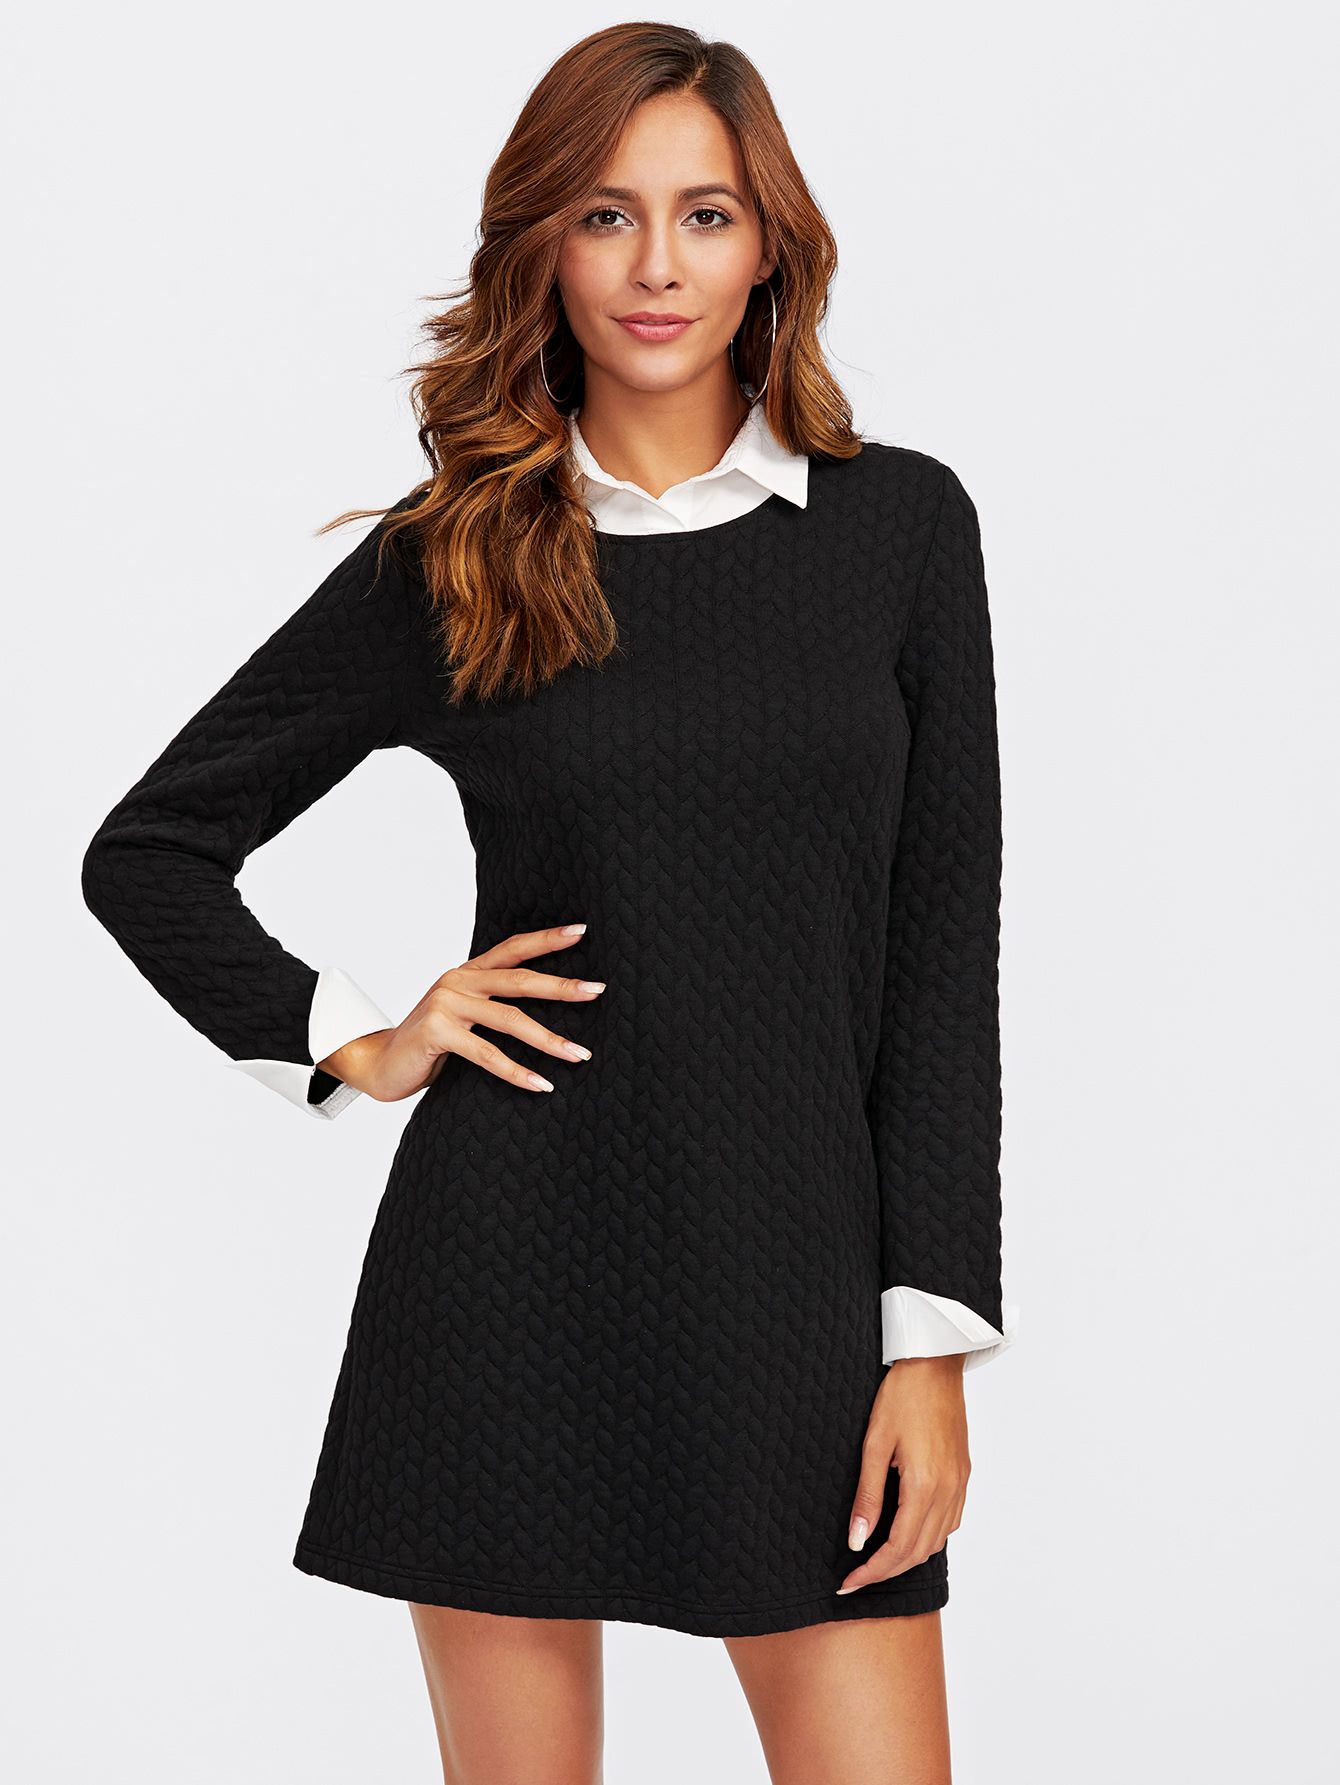 Contrast Collar And Cuff Textured 2 In 1 Dress | SHEIN